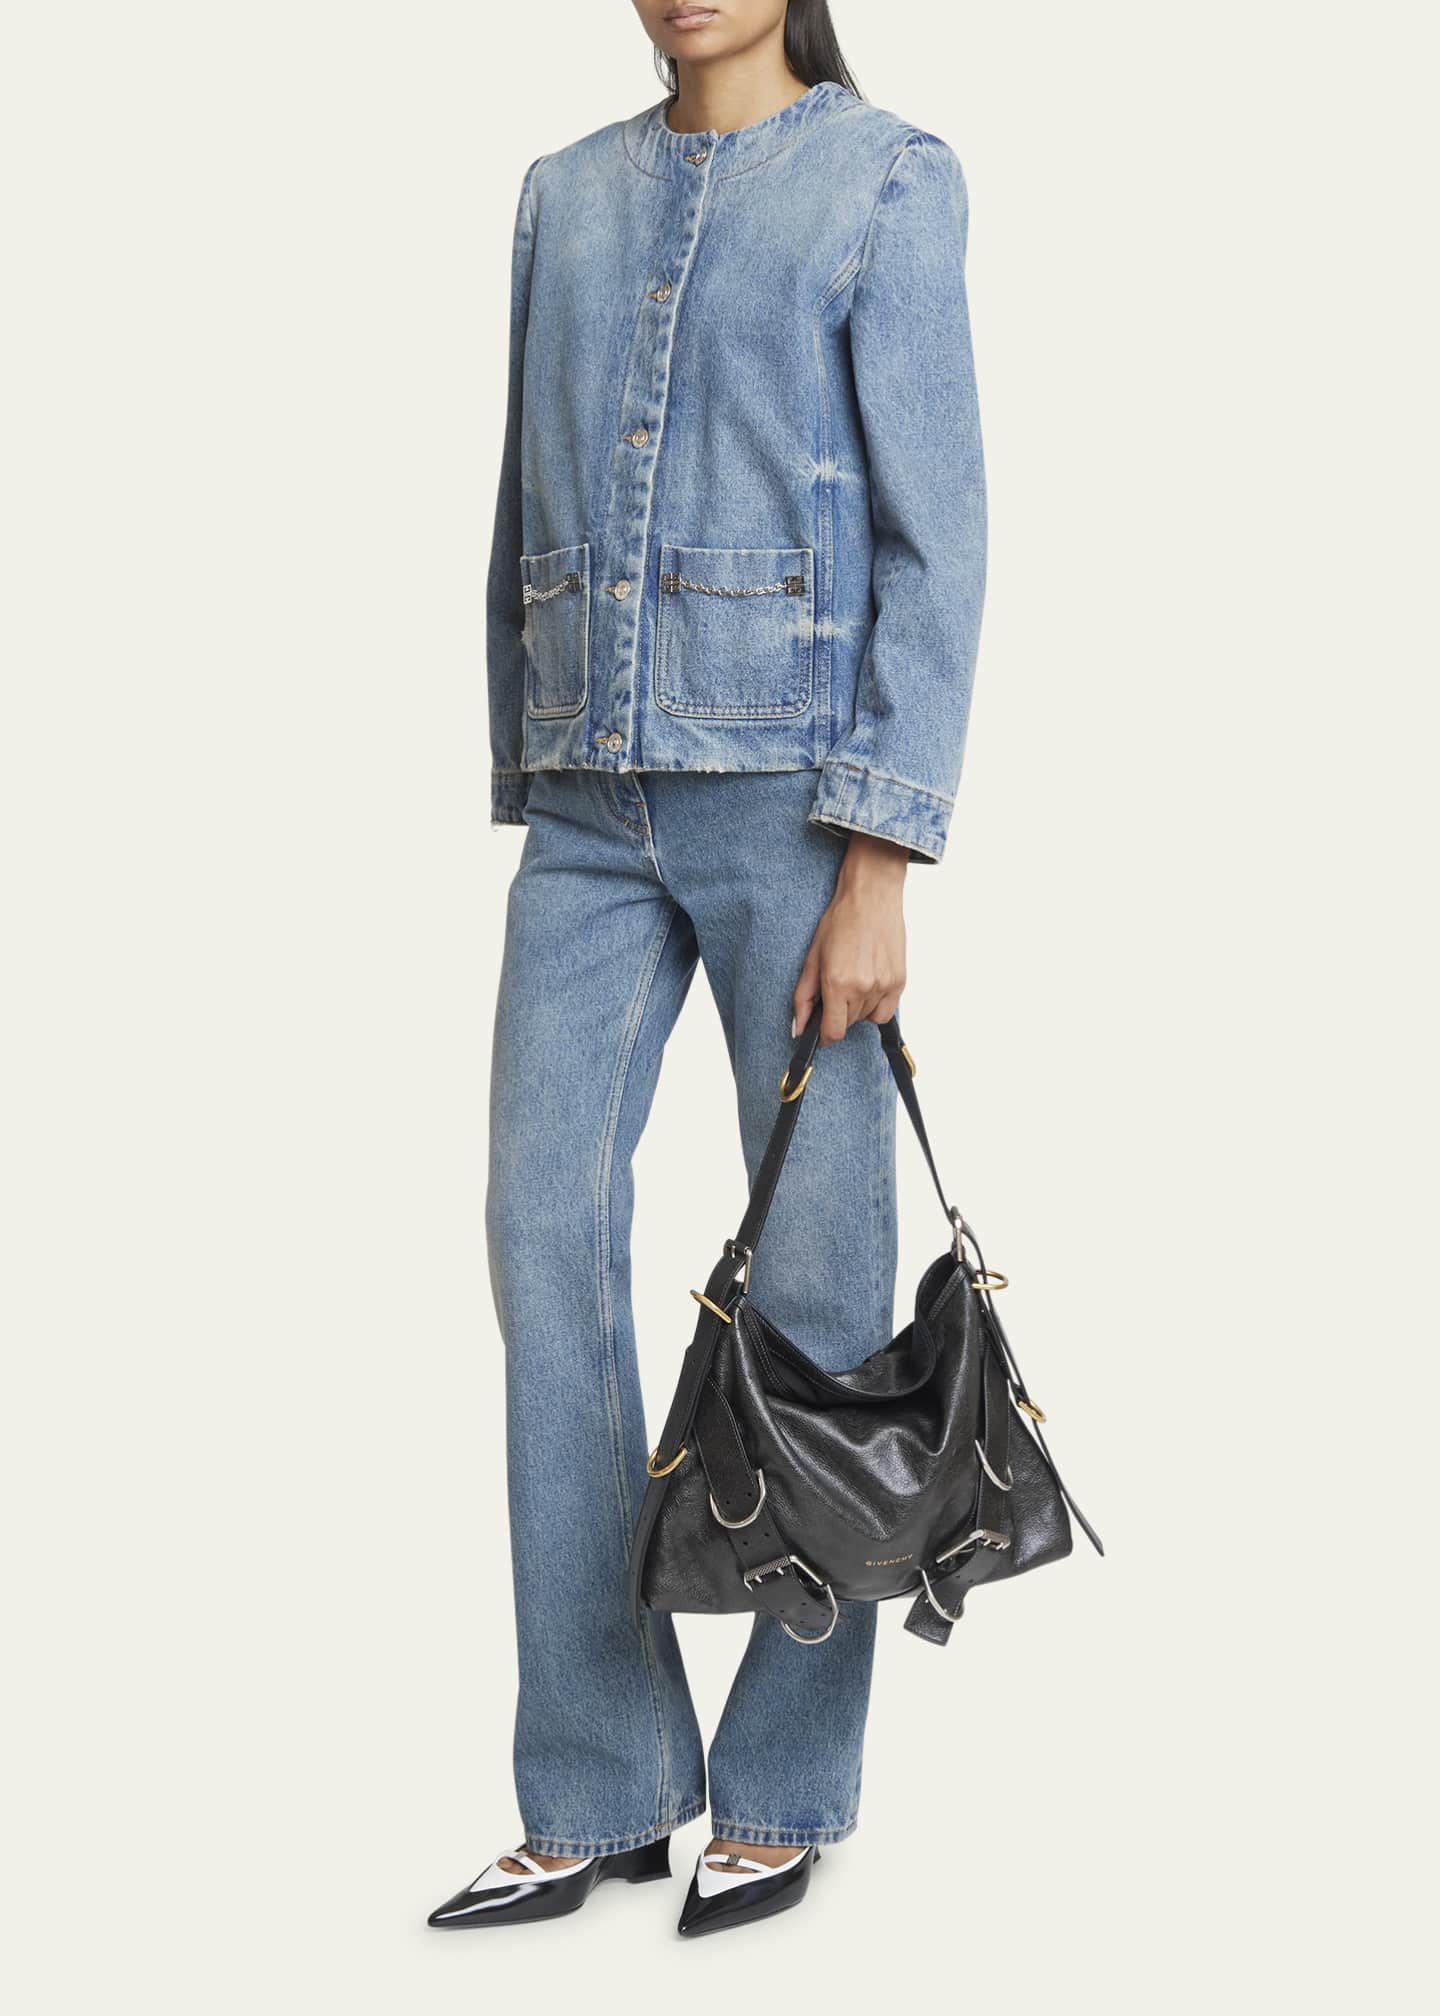 Givenchy Medium Voyou Buckle Shoulder Bag in Tumbled Leather - Bergdorf ...